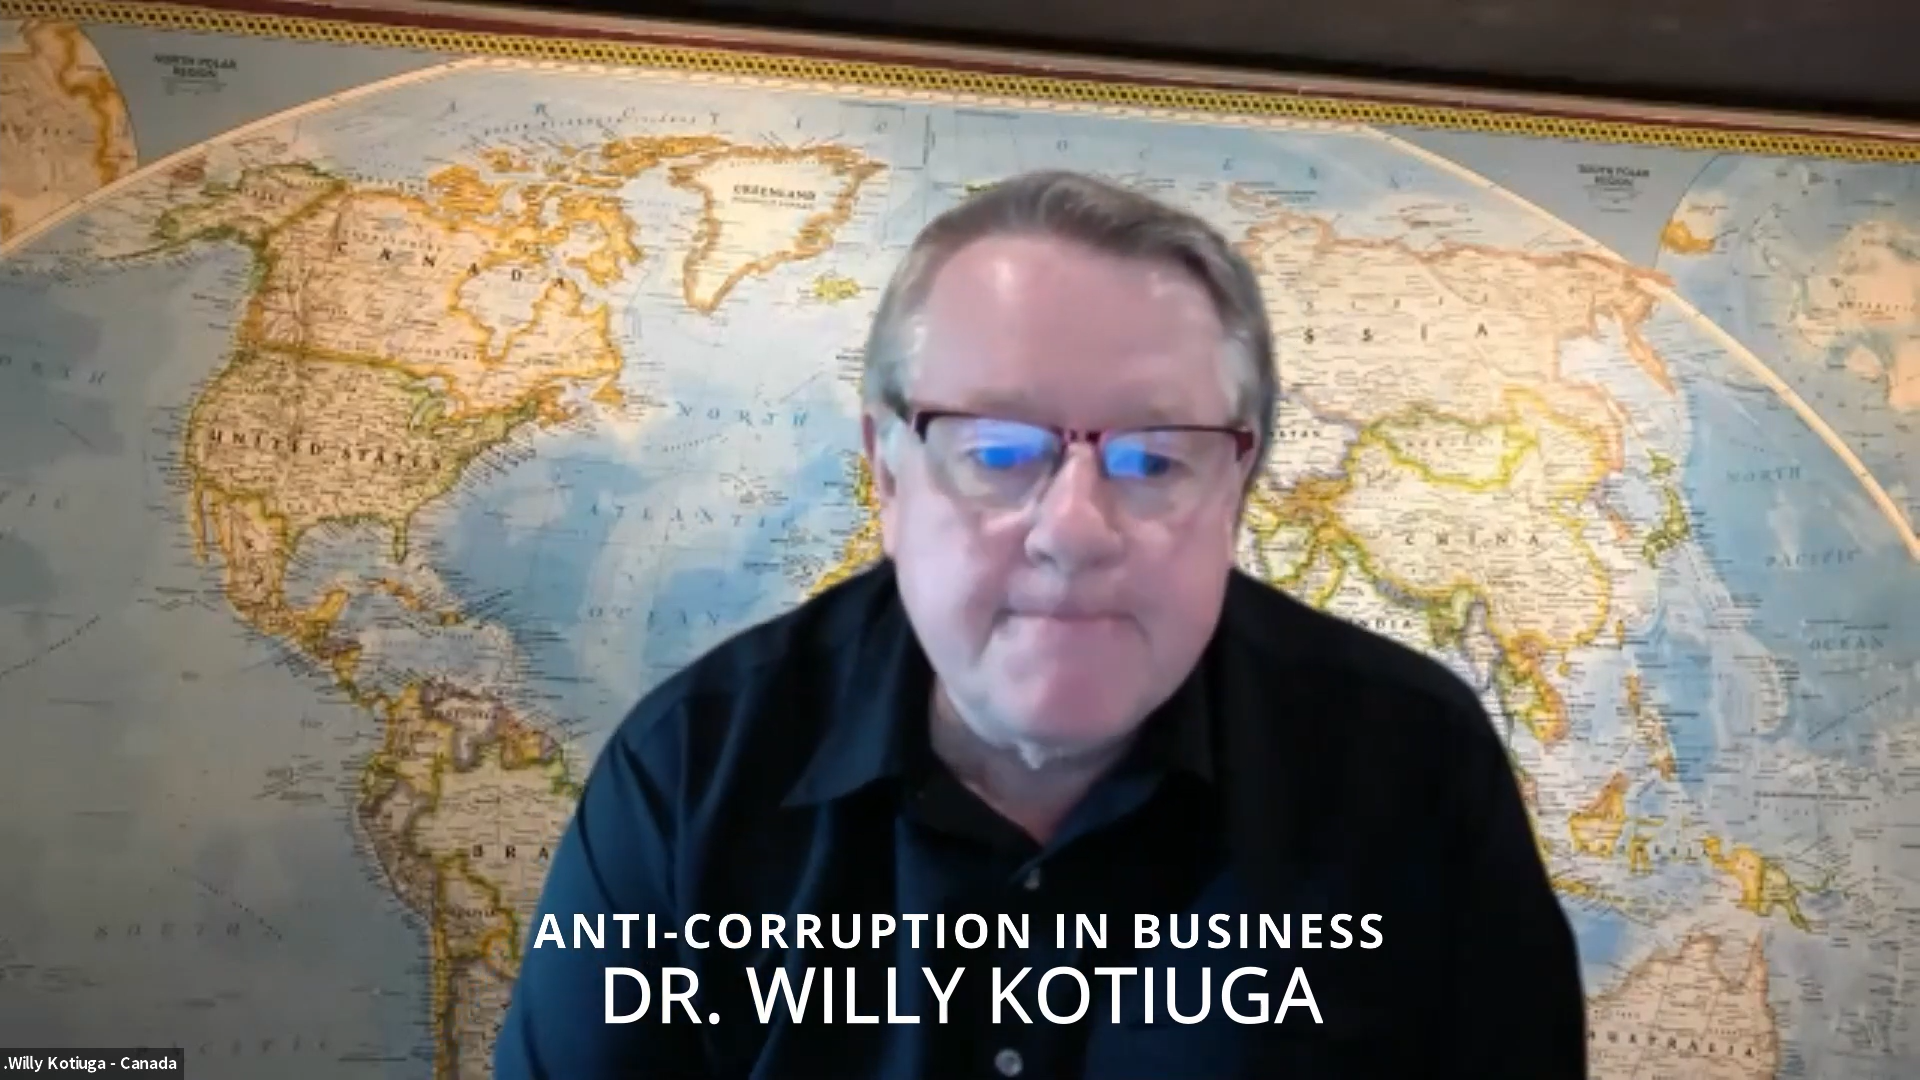 Dr. Willy Kotiuga, chairman of the Board of Regents of Bakke Graduate University, delivered a talk titled “Anti-corruption Perspectives and Practices in Business” on August 21, 2021. 